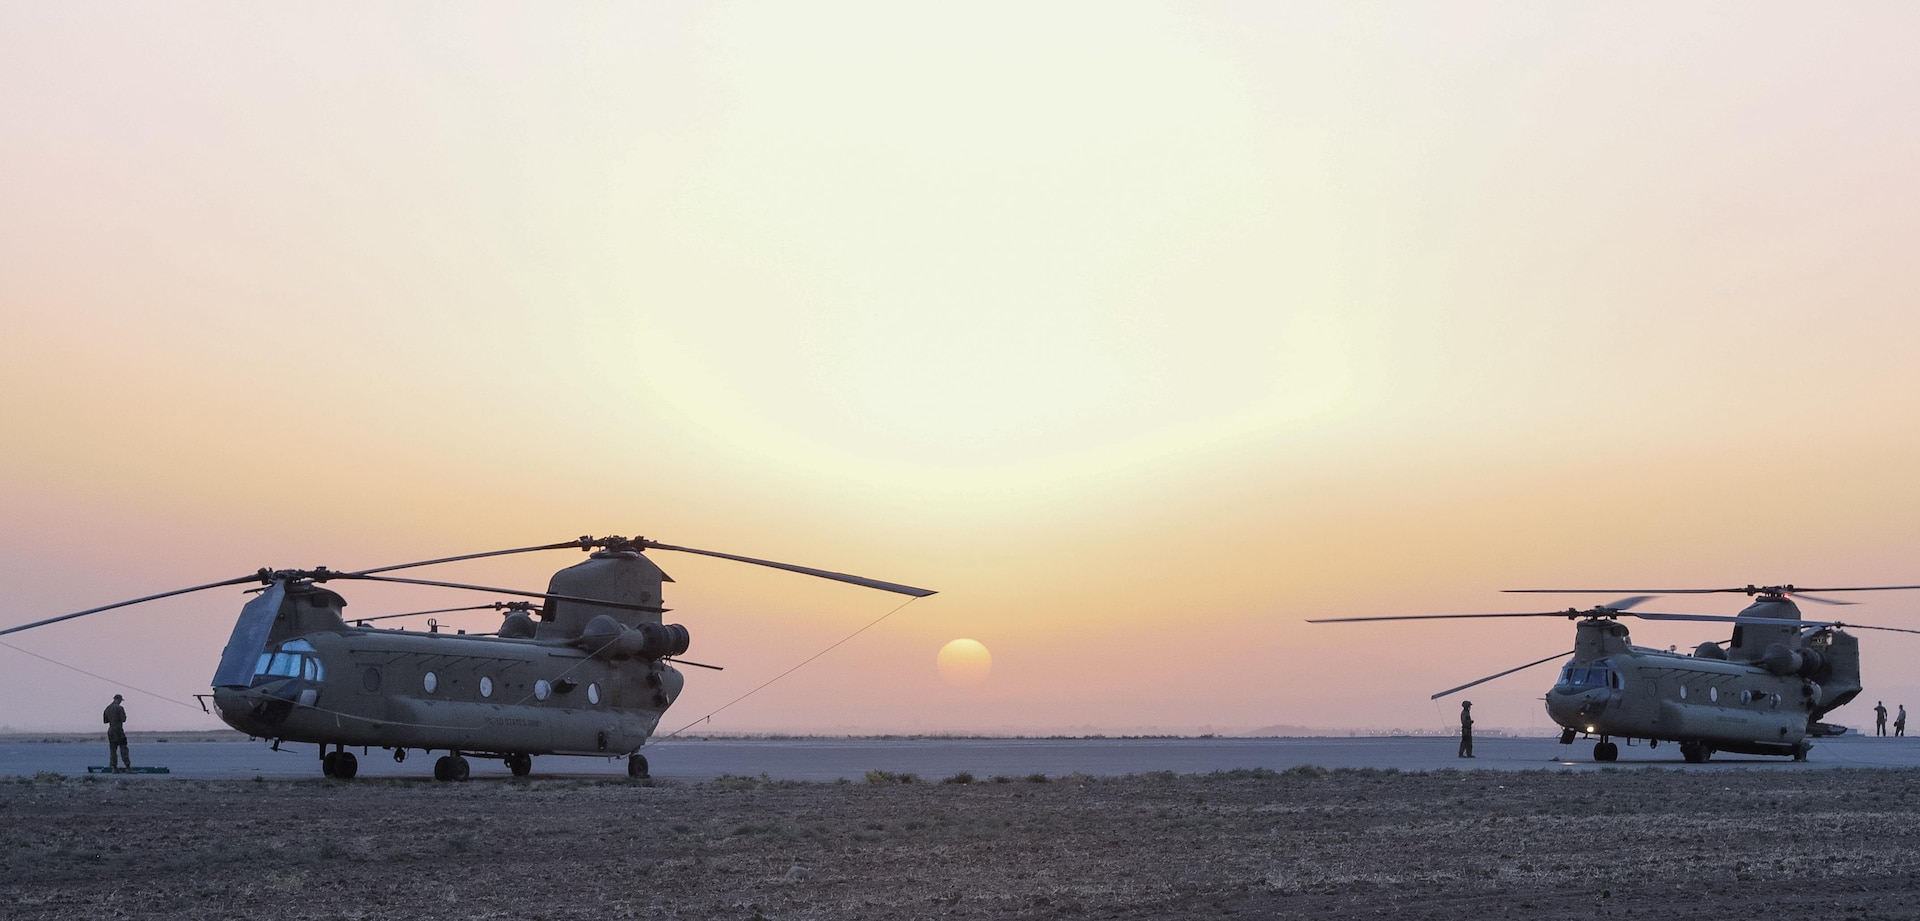 ERBIL, Iraq - CH-47 Chinook helicopters from the B Company, 2-149th General Support Aviation Battalion, Task Force Saber, undergo maintenance and inspections at Erbil, Iraq, July 10, 2017. The CH-47 Chinook provides a vital lift capability to Task Force Saber which increases the capability and mobility of Combined Joint Task Force – Operation Inherent Resolve. CJTF-OIR is the Coalition to defeat ISIS in Iraq and Syria. (U.S. Army photo by Capt. Stephen James)